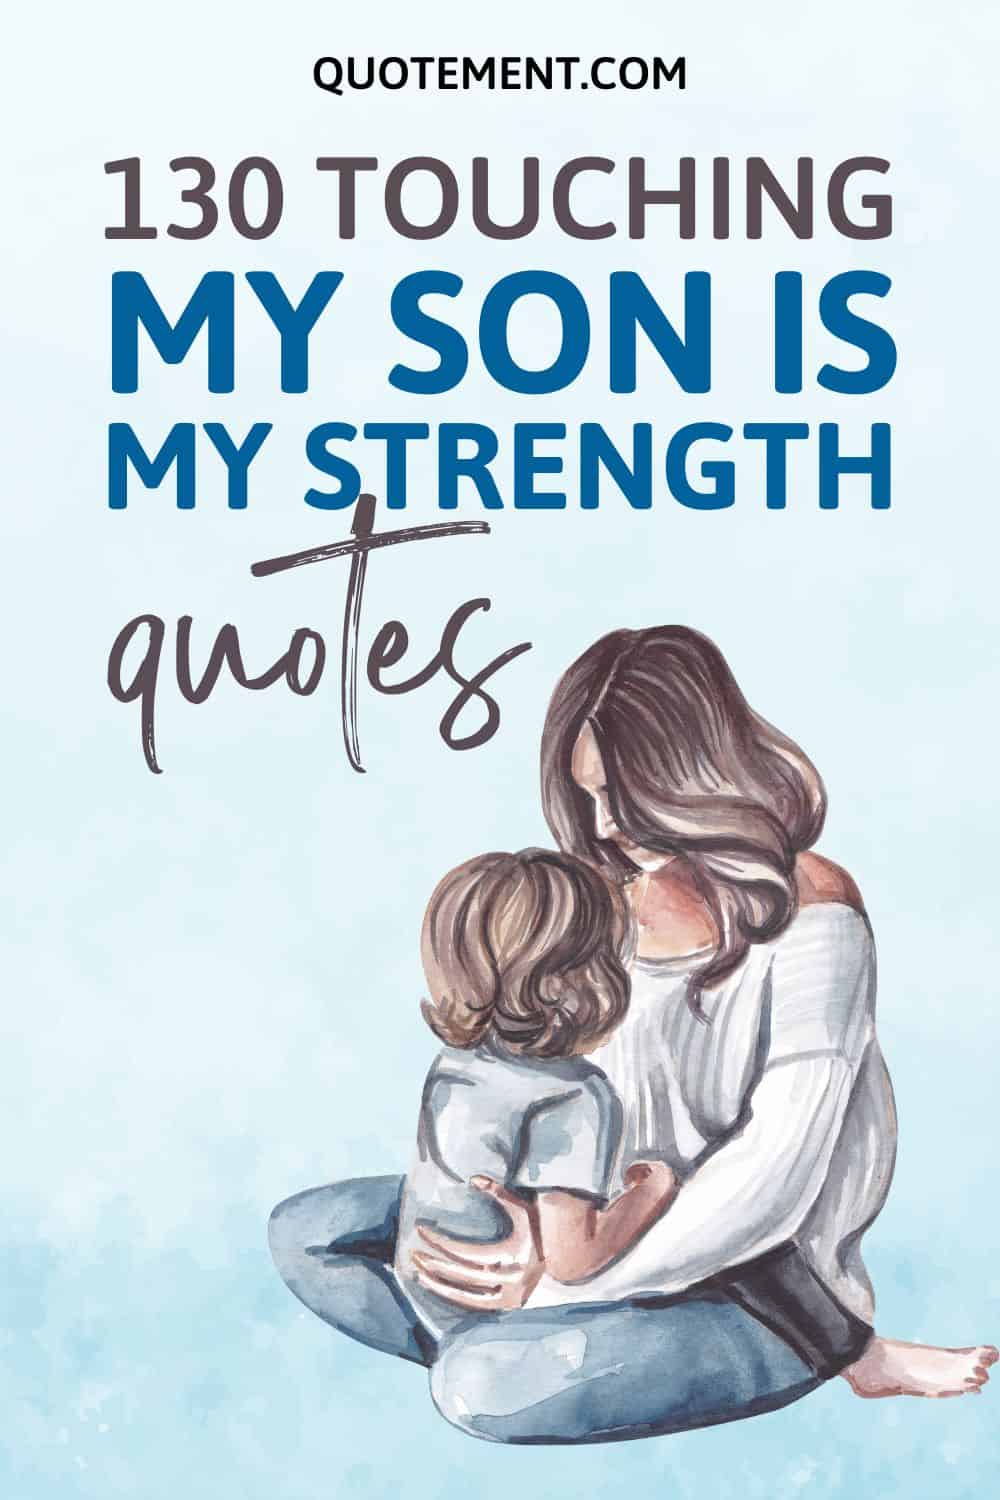 130 Best My Son Is My Strength Quotes To Melt Your Heart